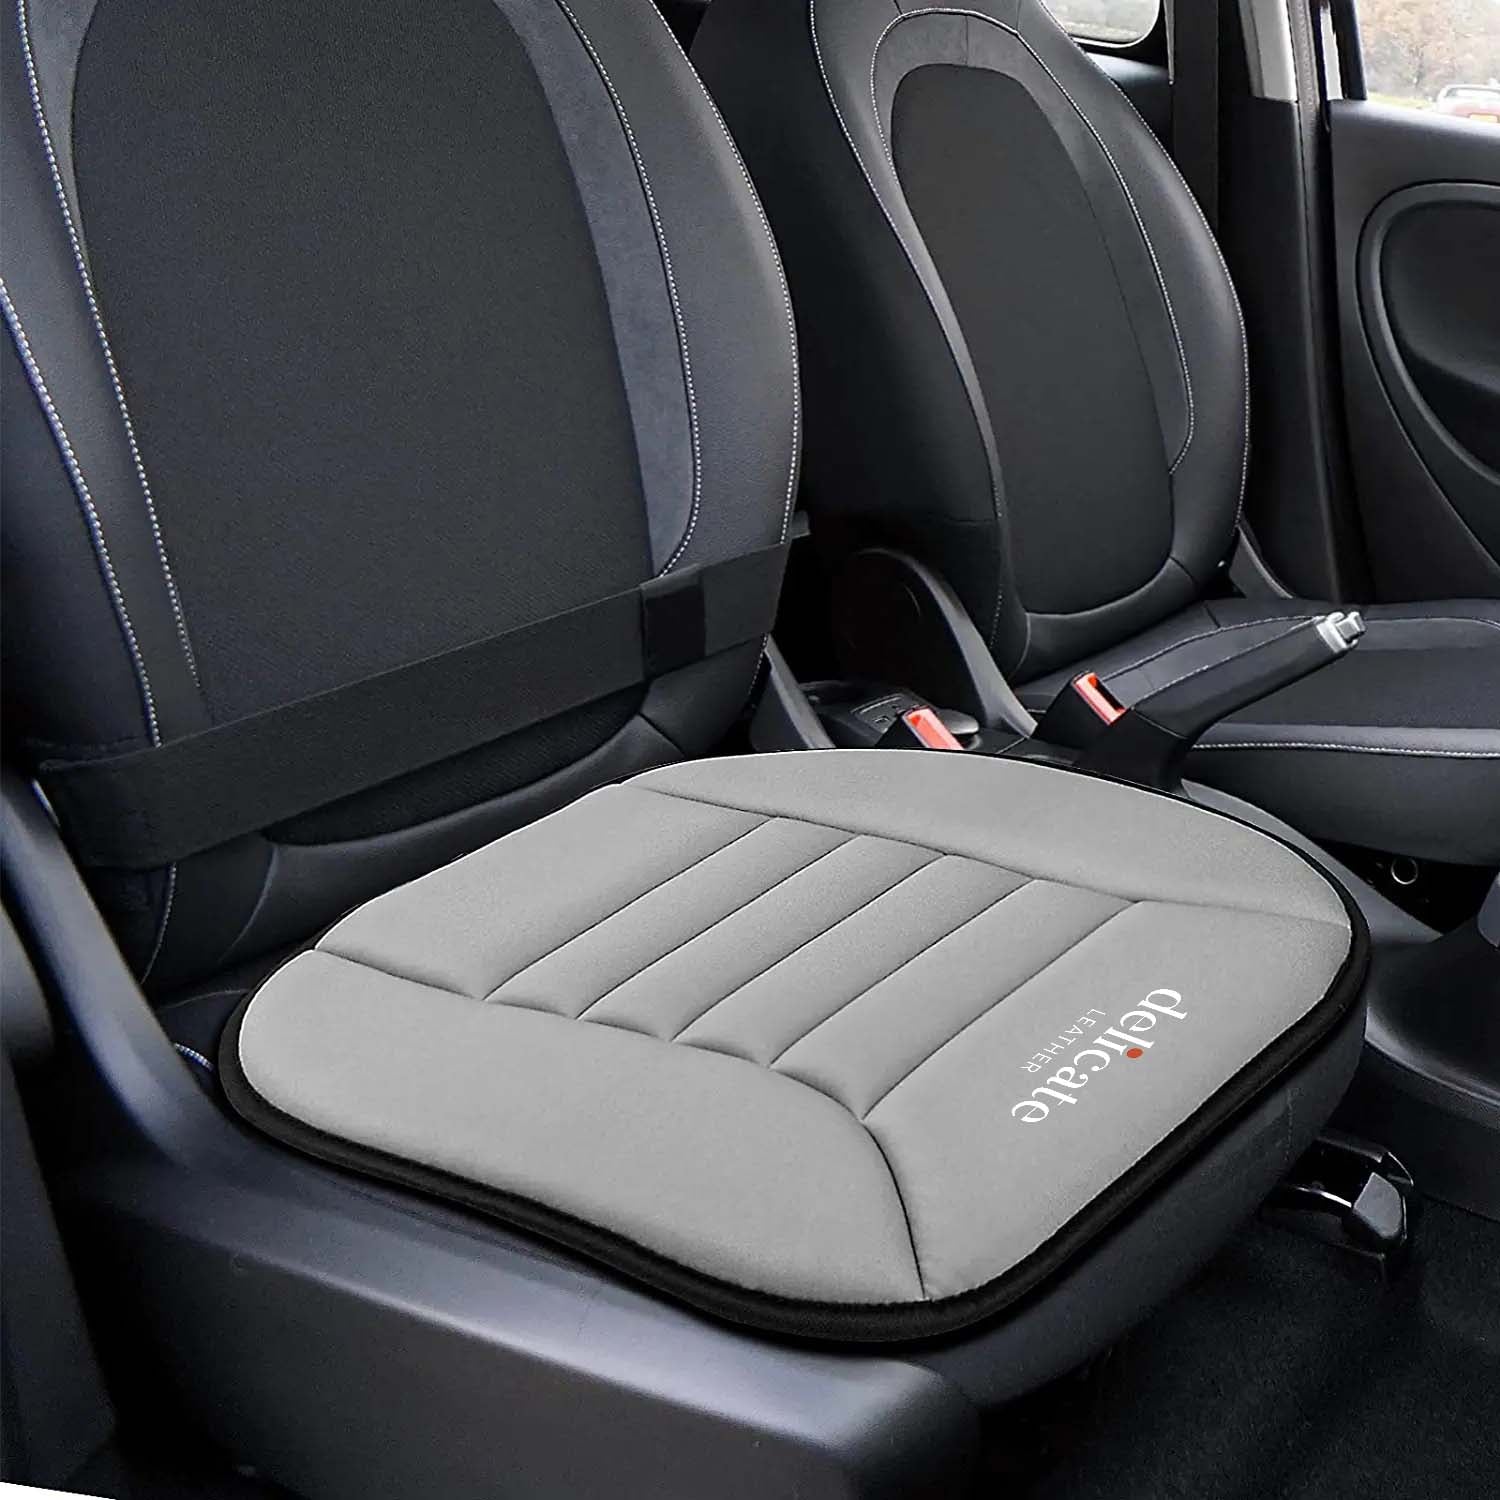 Infiniti Car Seat Cushion: Enhance Comfort and Support for Your Drive